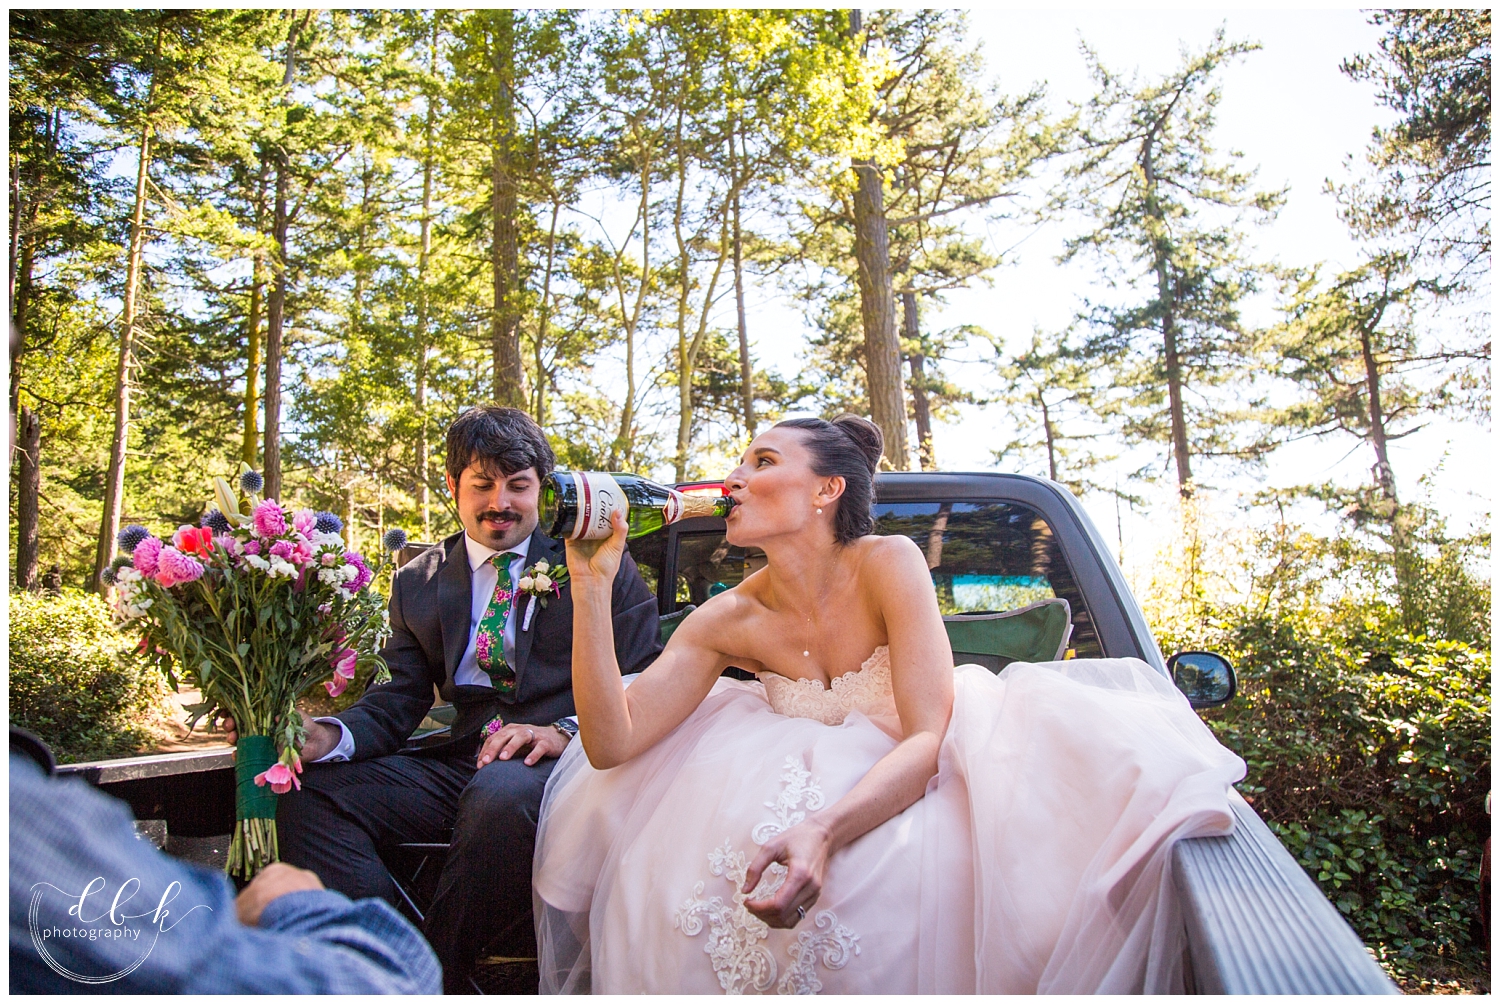 bride in blush pink wedding dress enjoying a sip of champagne from the bottle after wedding ceremony in Washington Park, Anacortes